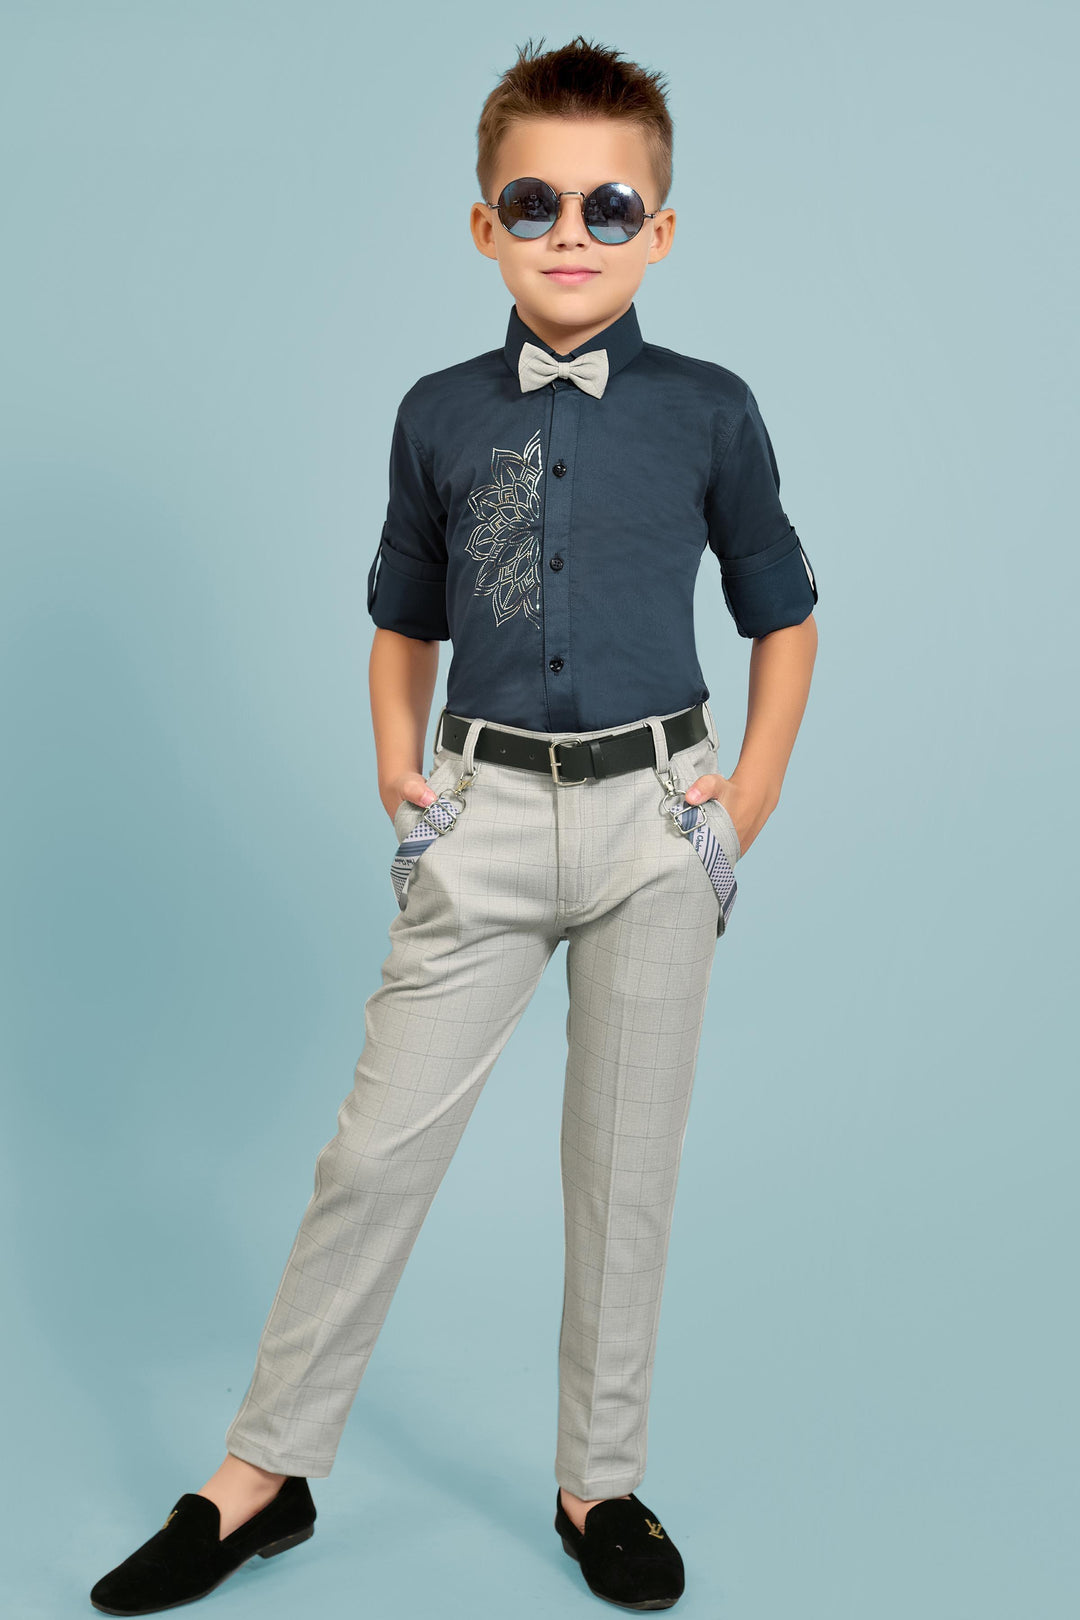 Dark Grey Suspender Style Pant Shirt Set for Boys with Bow and Belt - Seasons Chennai